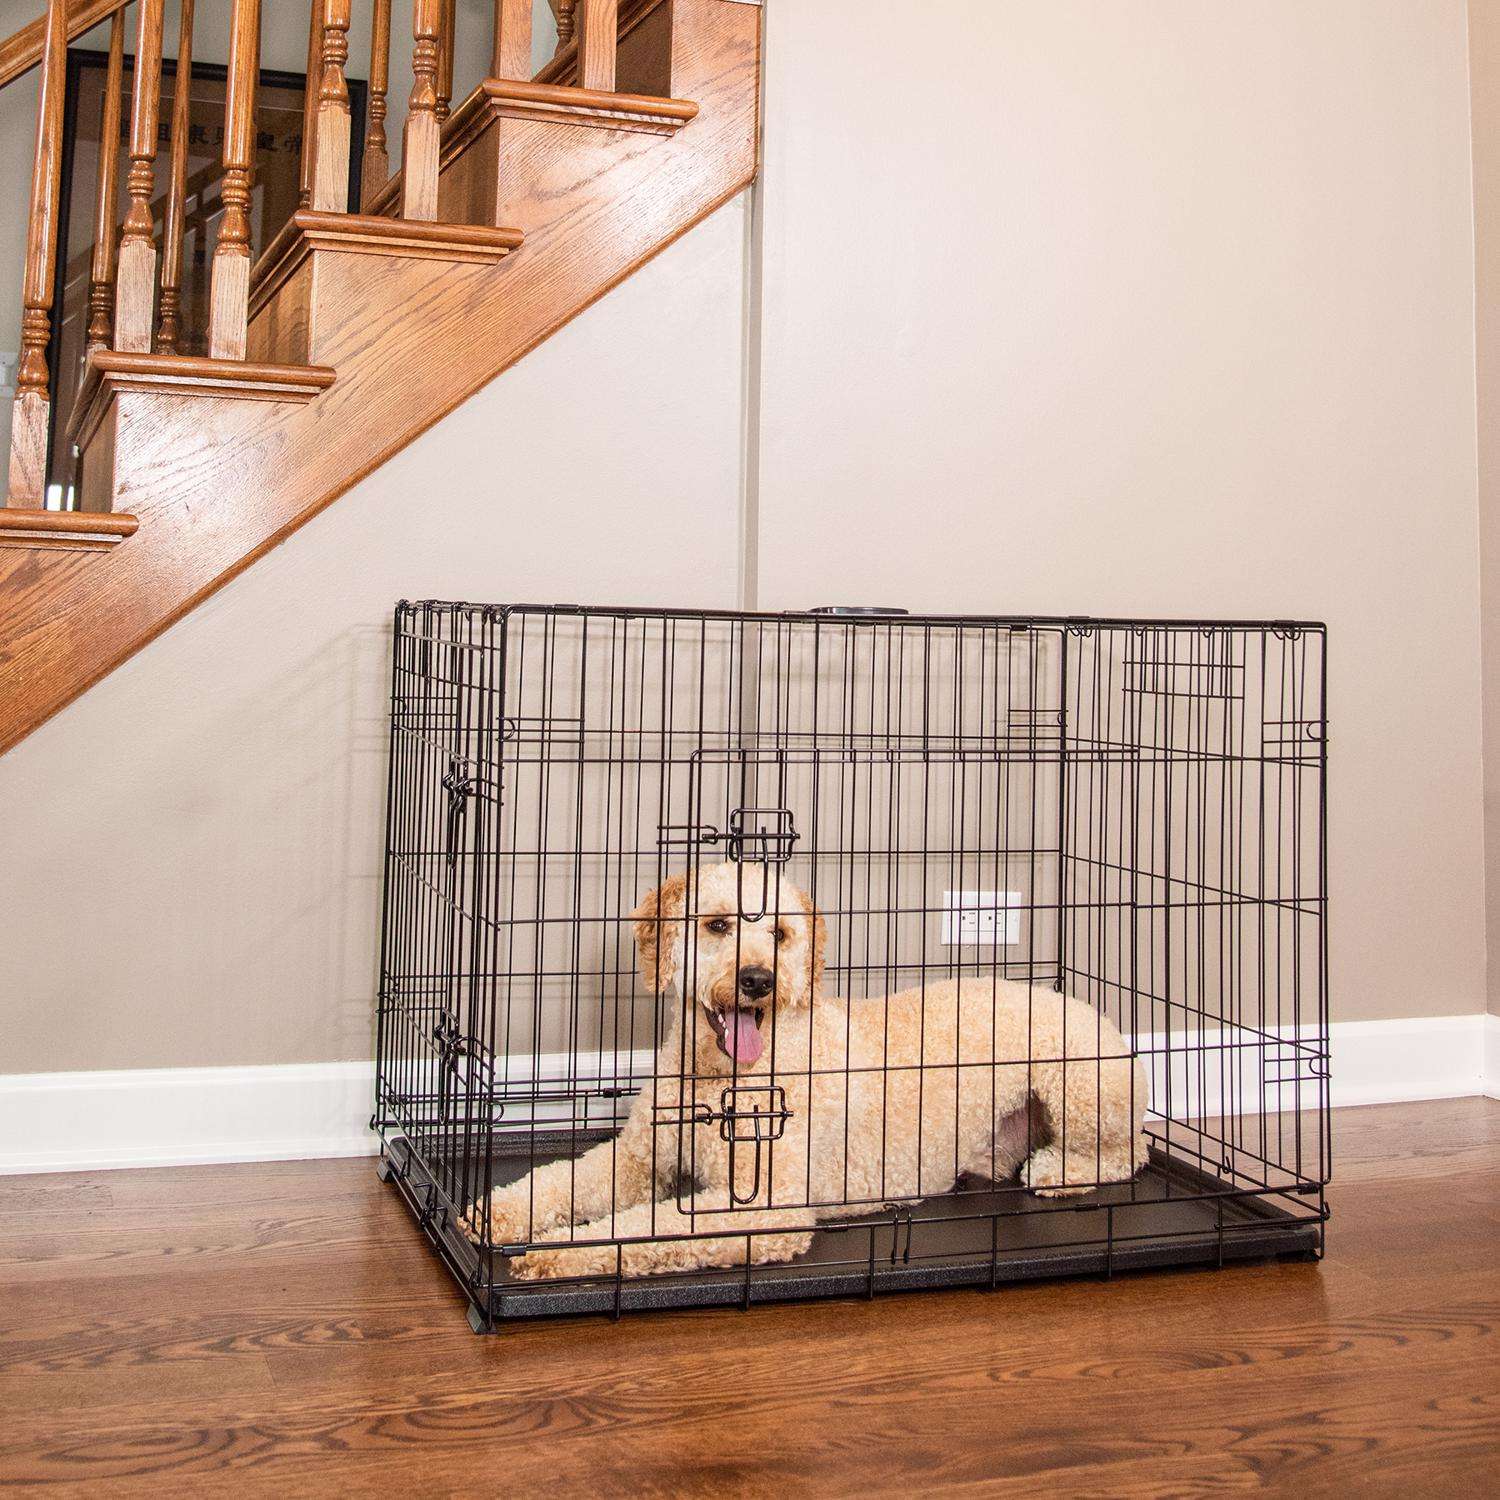 How Long Can a Dog Stay in a Crate? Experts Weigh In